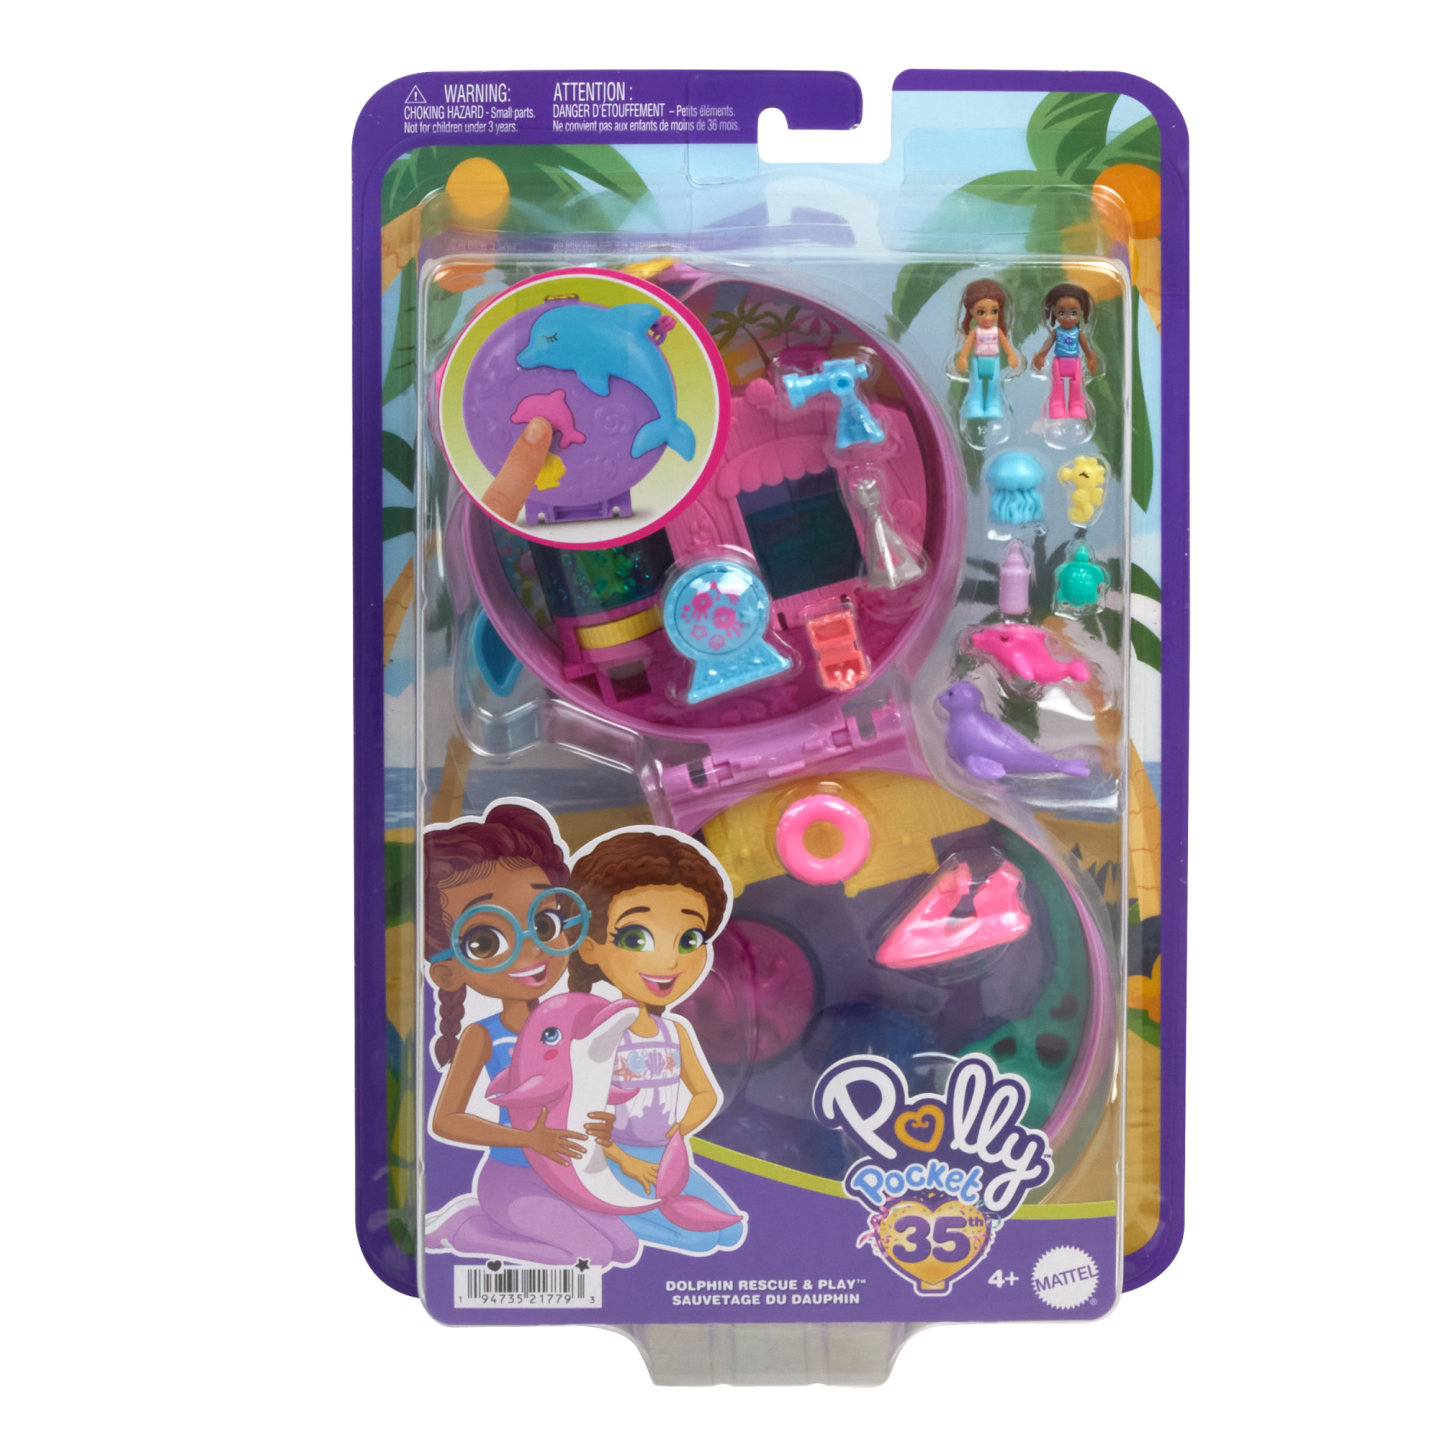 Polly Pocket Big Pocket World Dolphin Rescue & Play Compact HWN96